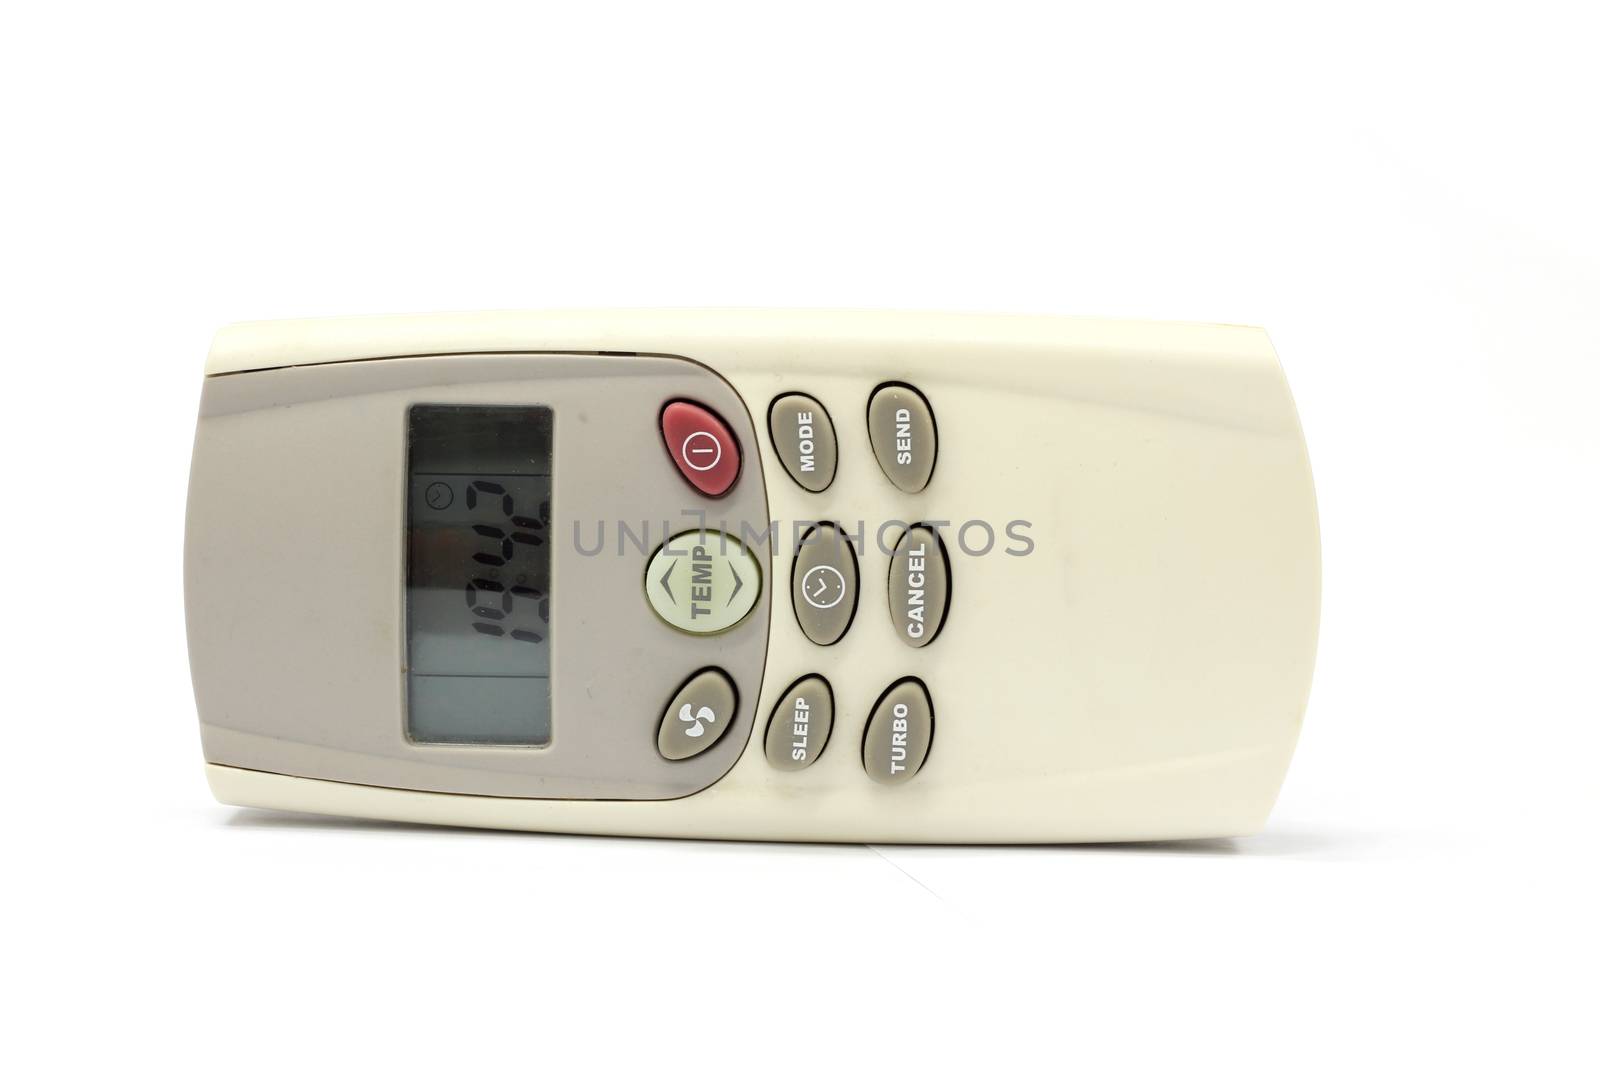 isolated white bac kground air condition remote by ZONETEEn